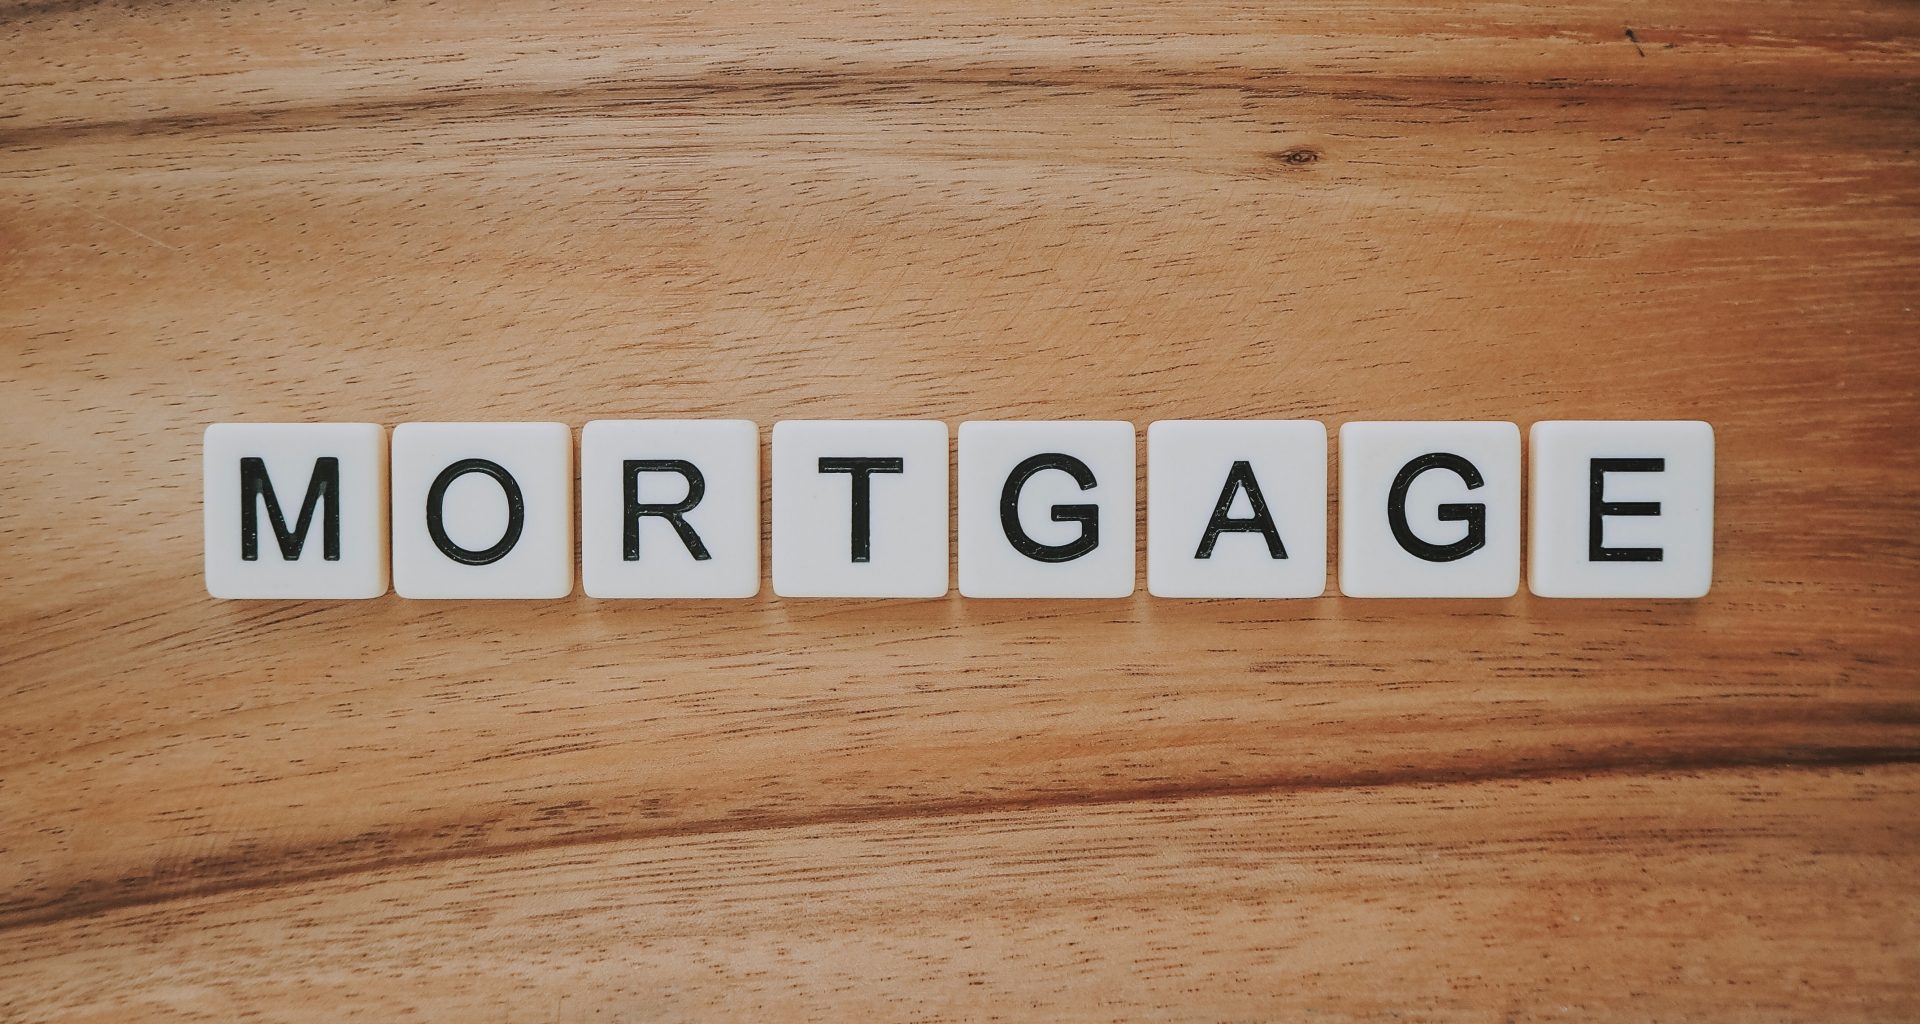 Mortgage image - property finance update